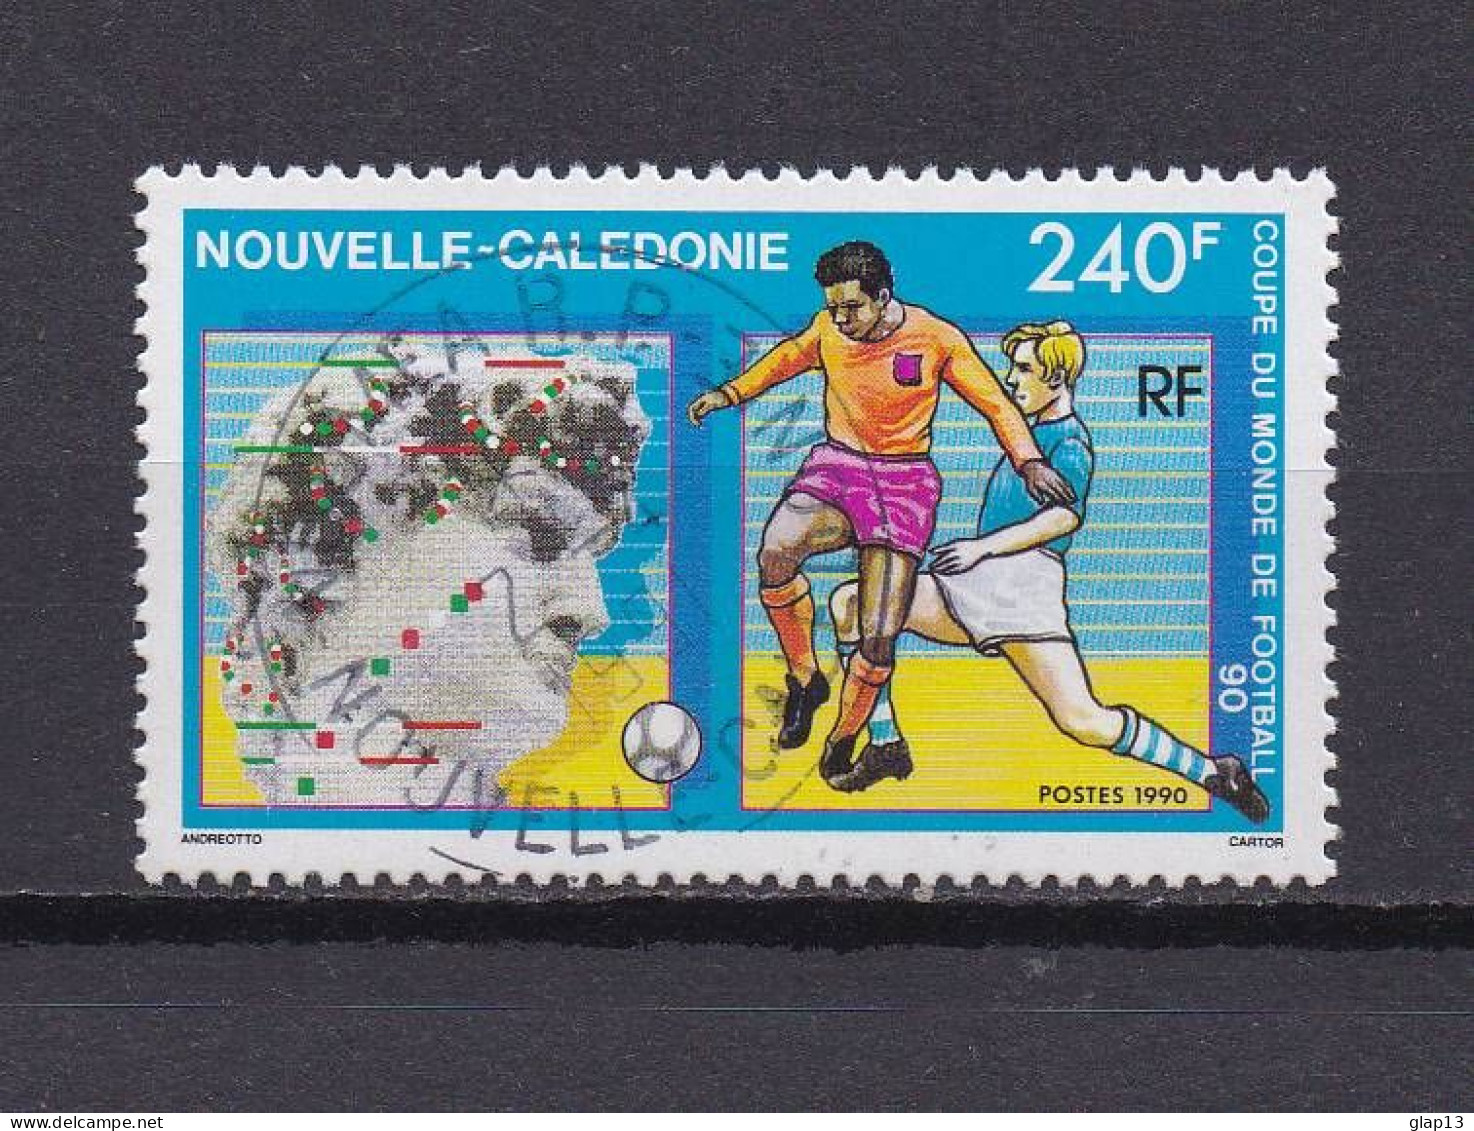 NOUVELLE-CALEDONIE 1990 TIMBRE N°596 OBLITERE FOOTBALL - Gebraucht